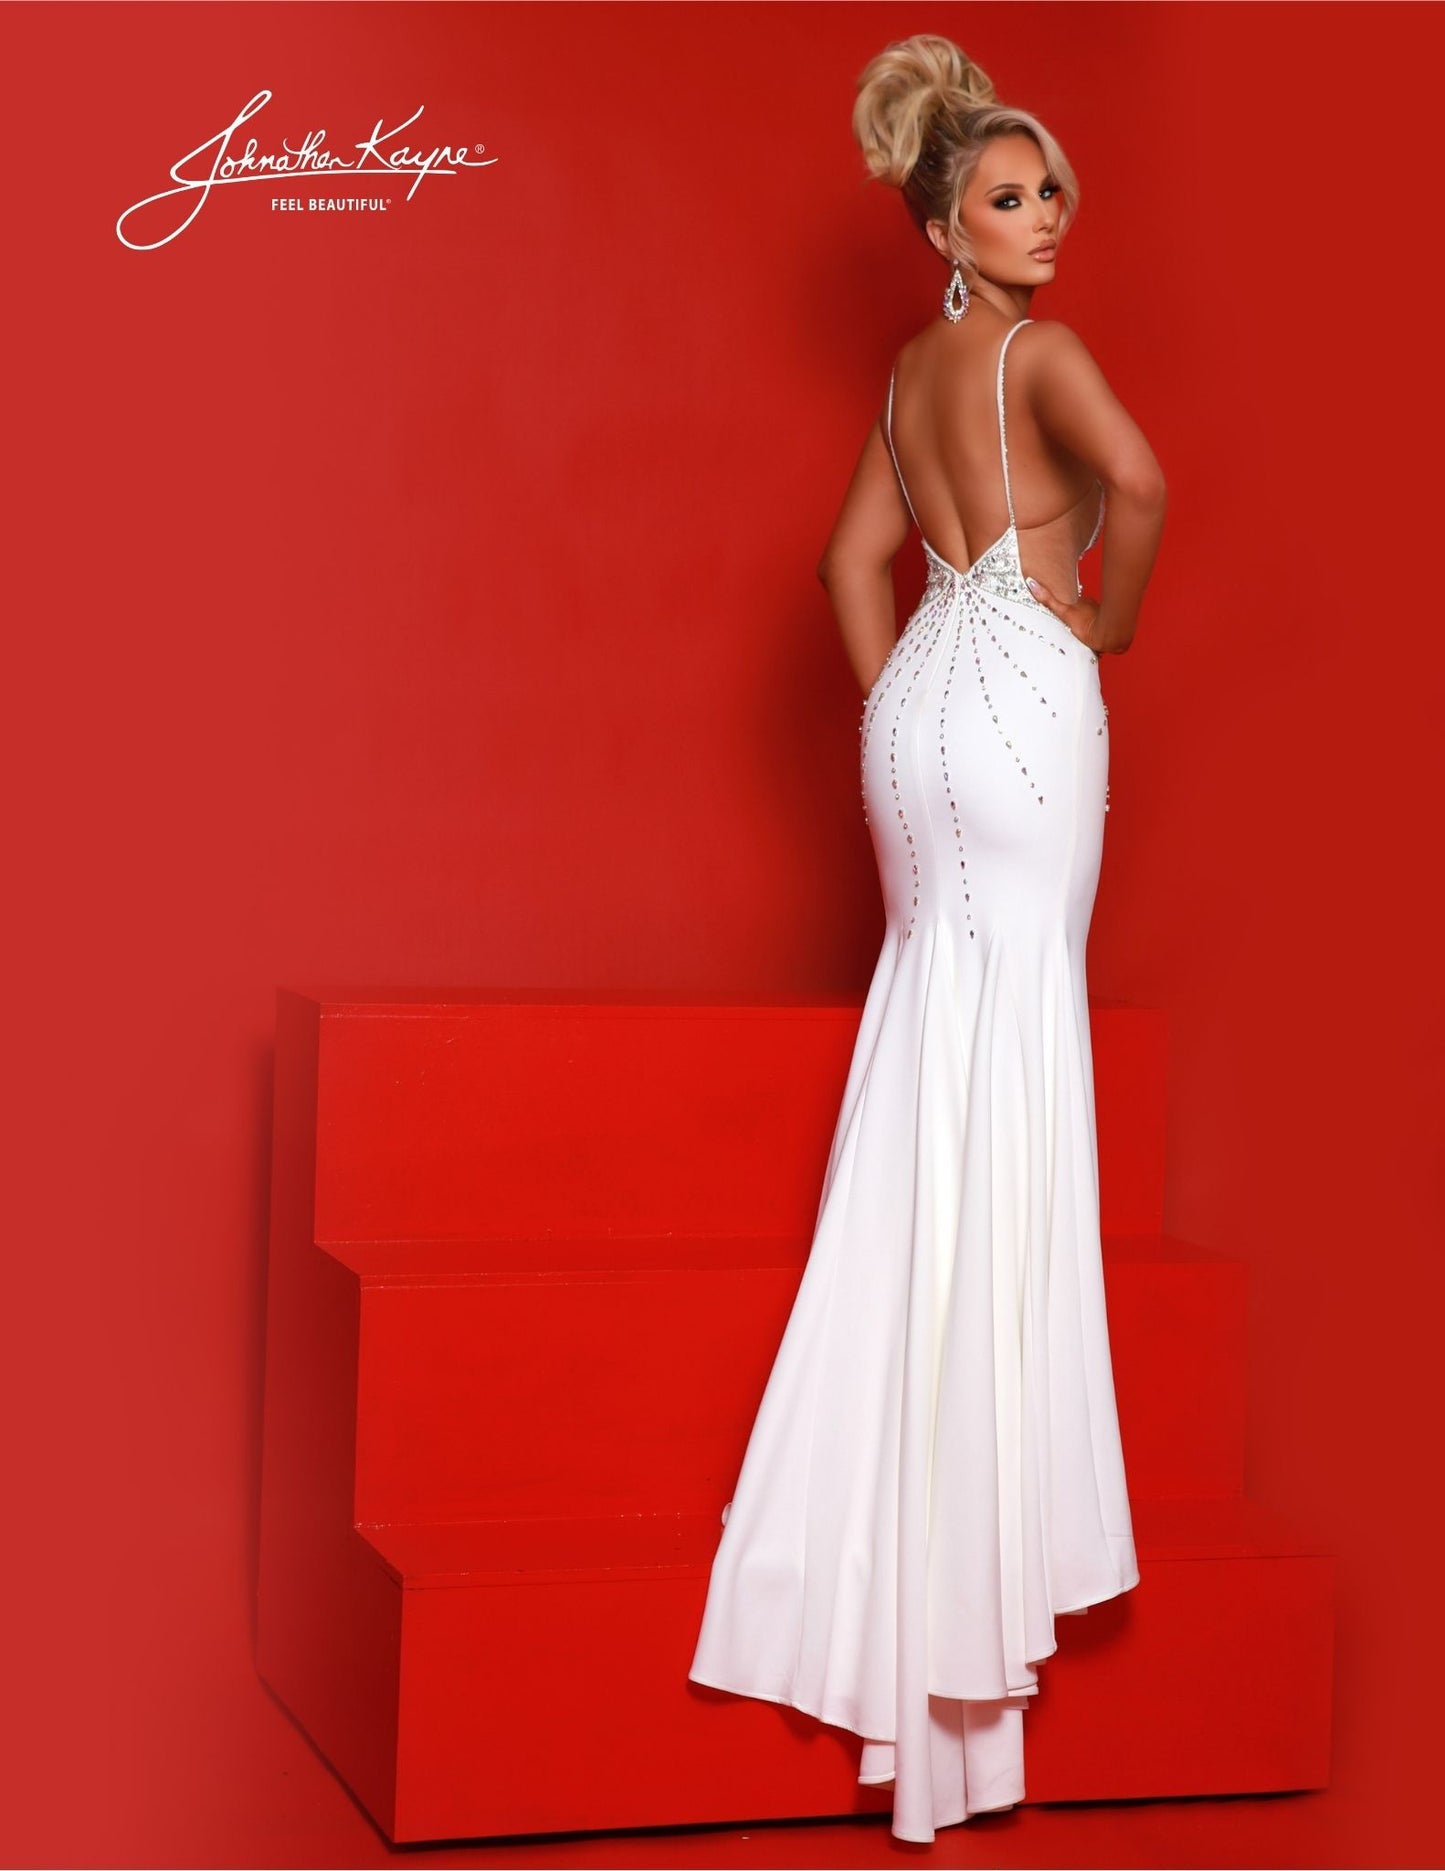 The breathtaking Johnathan Kayne 2881 Long Prom Dress dazzles with a fitted V- neckline, cut out, slit,  train, and formal pageant gown. The sleek silhouette and chic design make it perfect for a special occasion. Elevate your style and make a lasting impression with this heavy knit gown. Featuring sultry side cutouts, a low V-neckline, and a daring thigh-high slit, this dress is designed to capture attention and leave onlookers in awe.